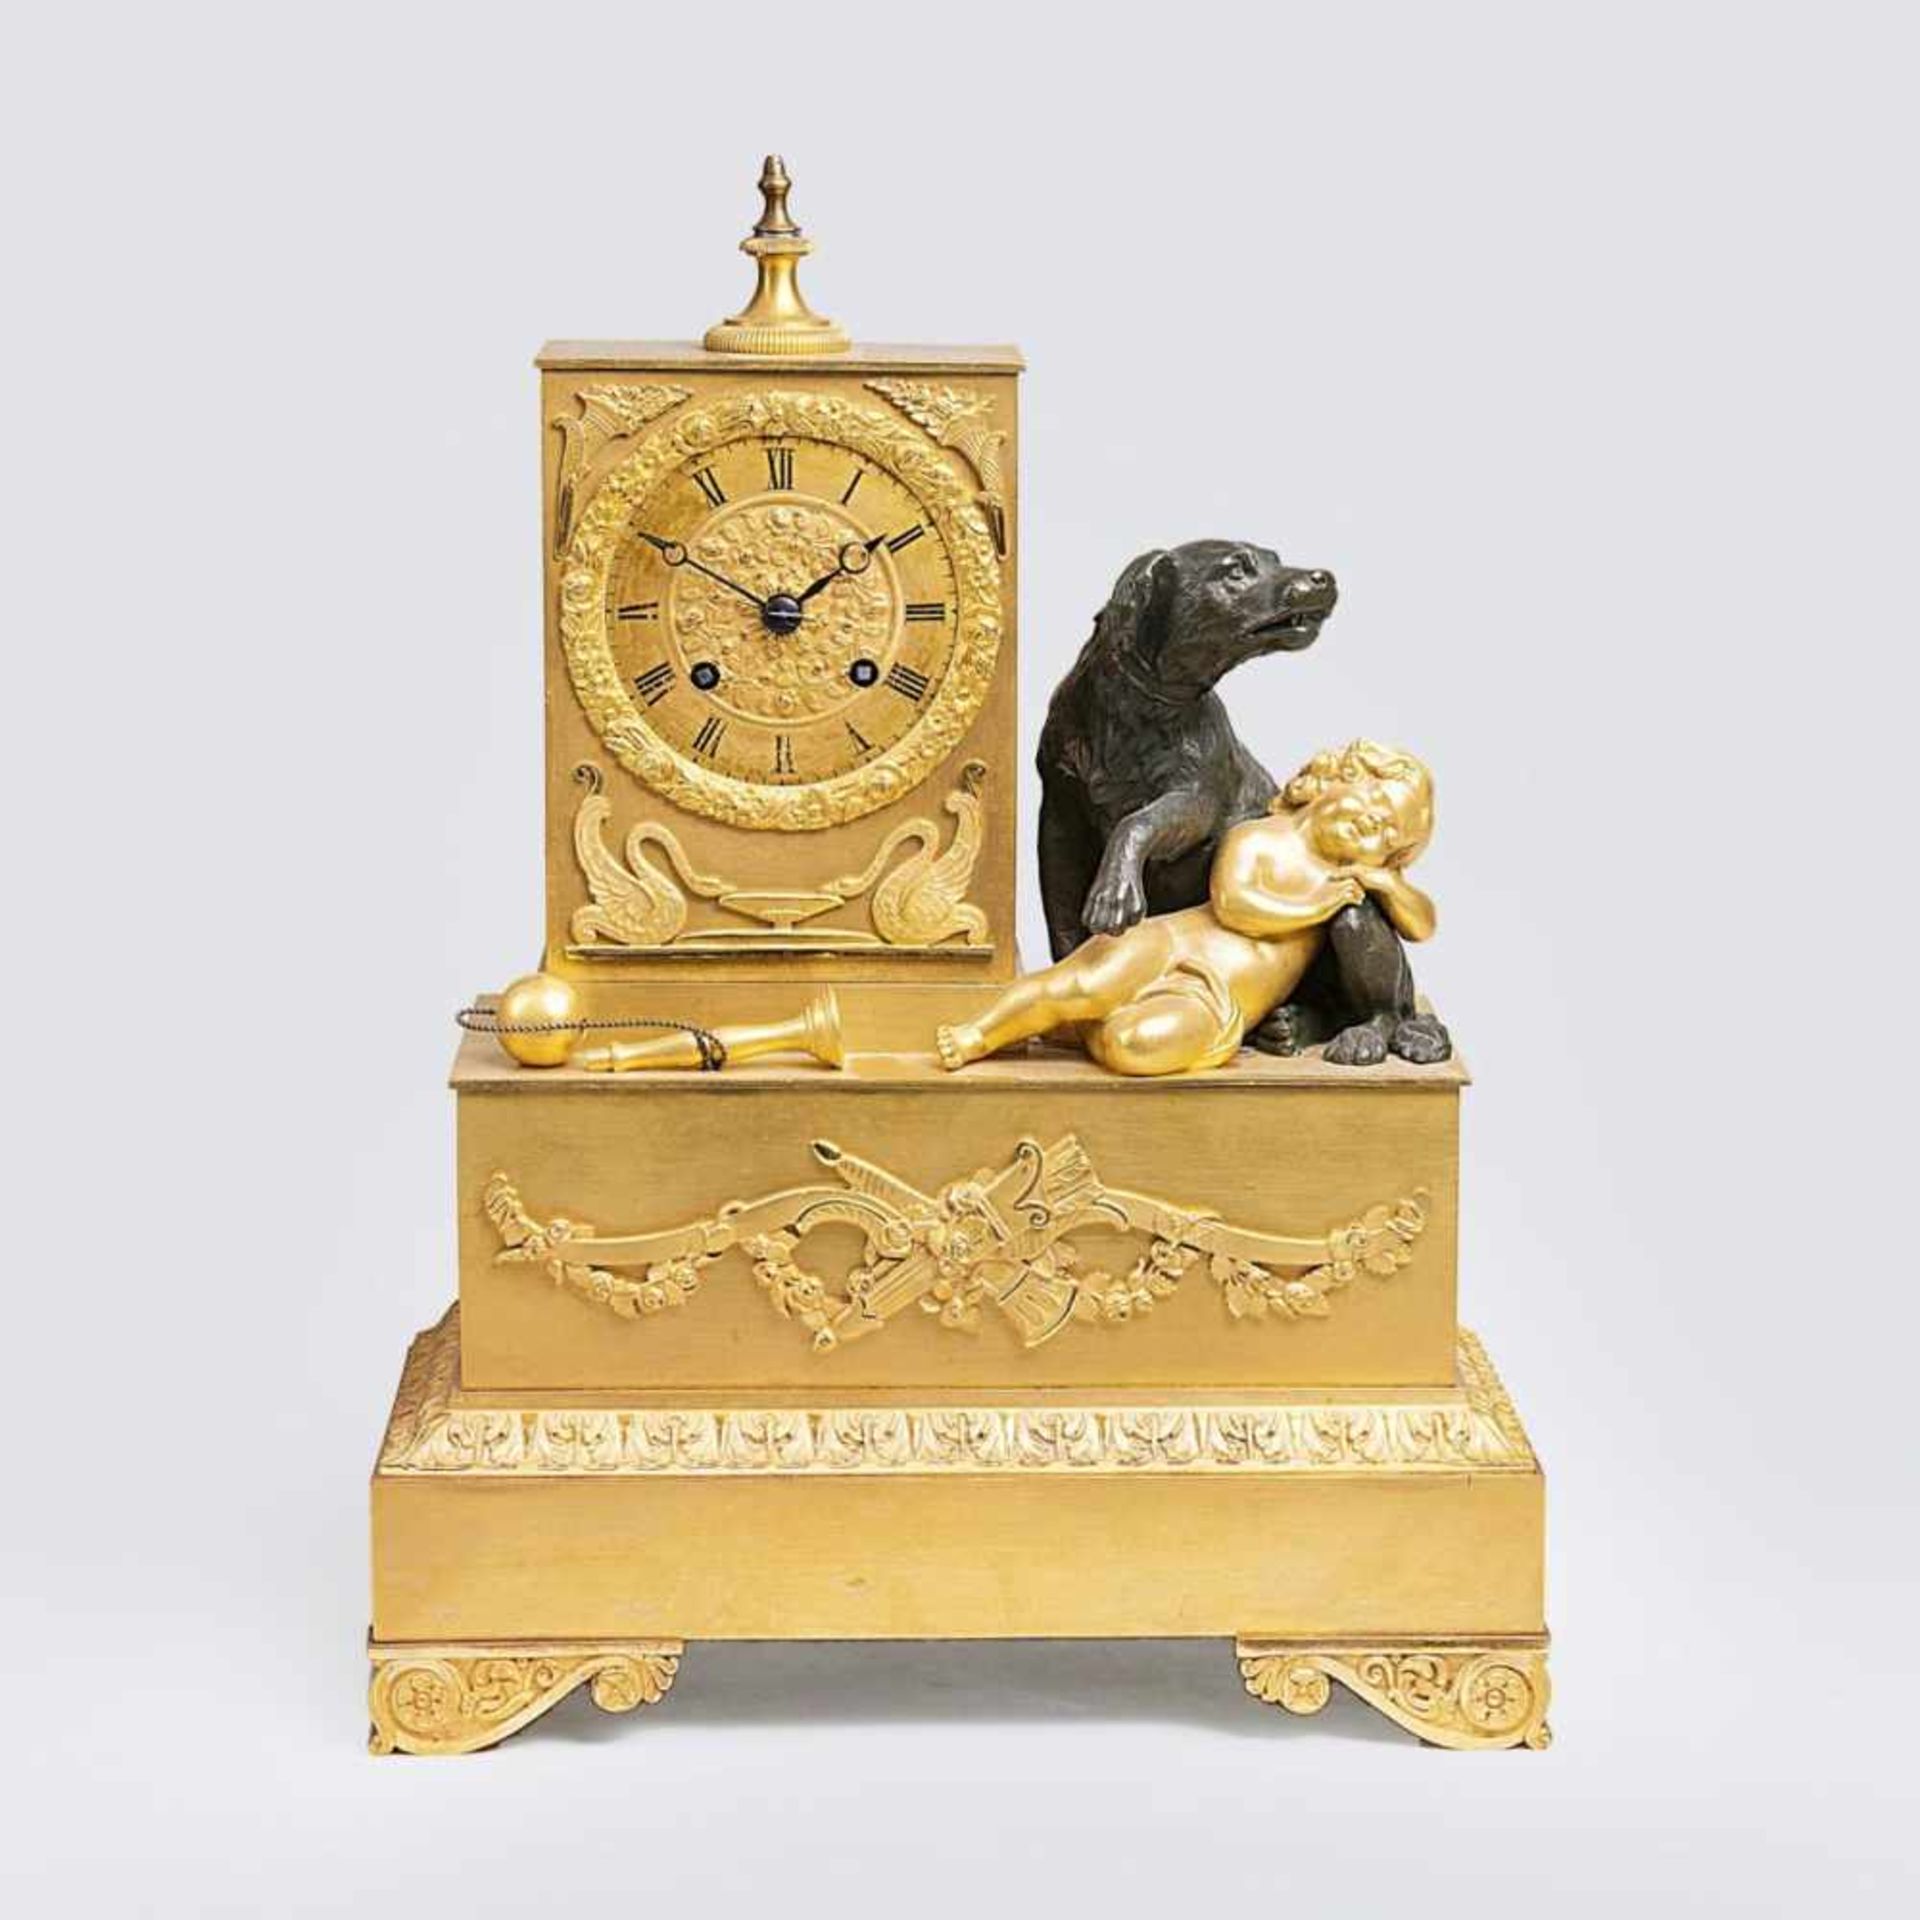 Leroux à Parislate 18/early 19th cent.An Empire Pendule 'Sleeping Putto' as Allegory of Loyalty'